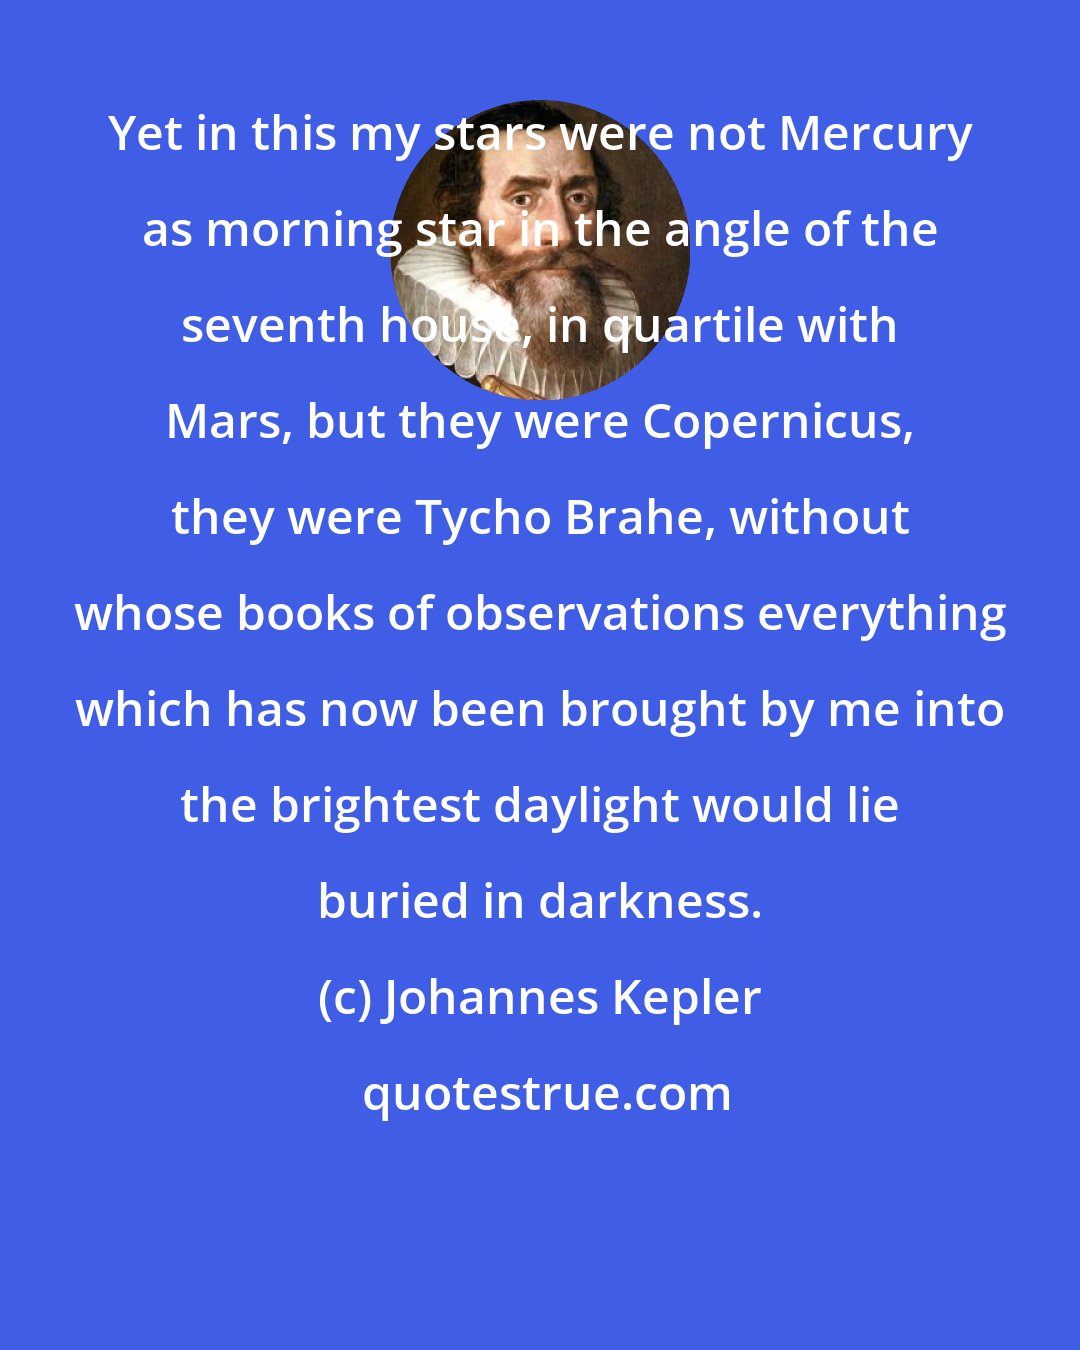 Johannes Kepler: Yet in this my stars were not Mercury as morning star in the angle of the seventh house, in quartile with Mars, but they were Copernicus, they were Tycho Brahe, without whose books of observations everything which has now been brought by me into the brightest daylight would lie buried in darkness.